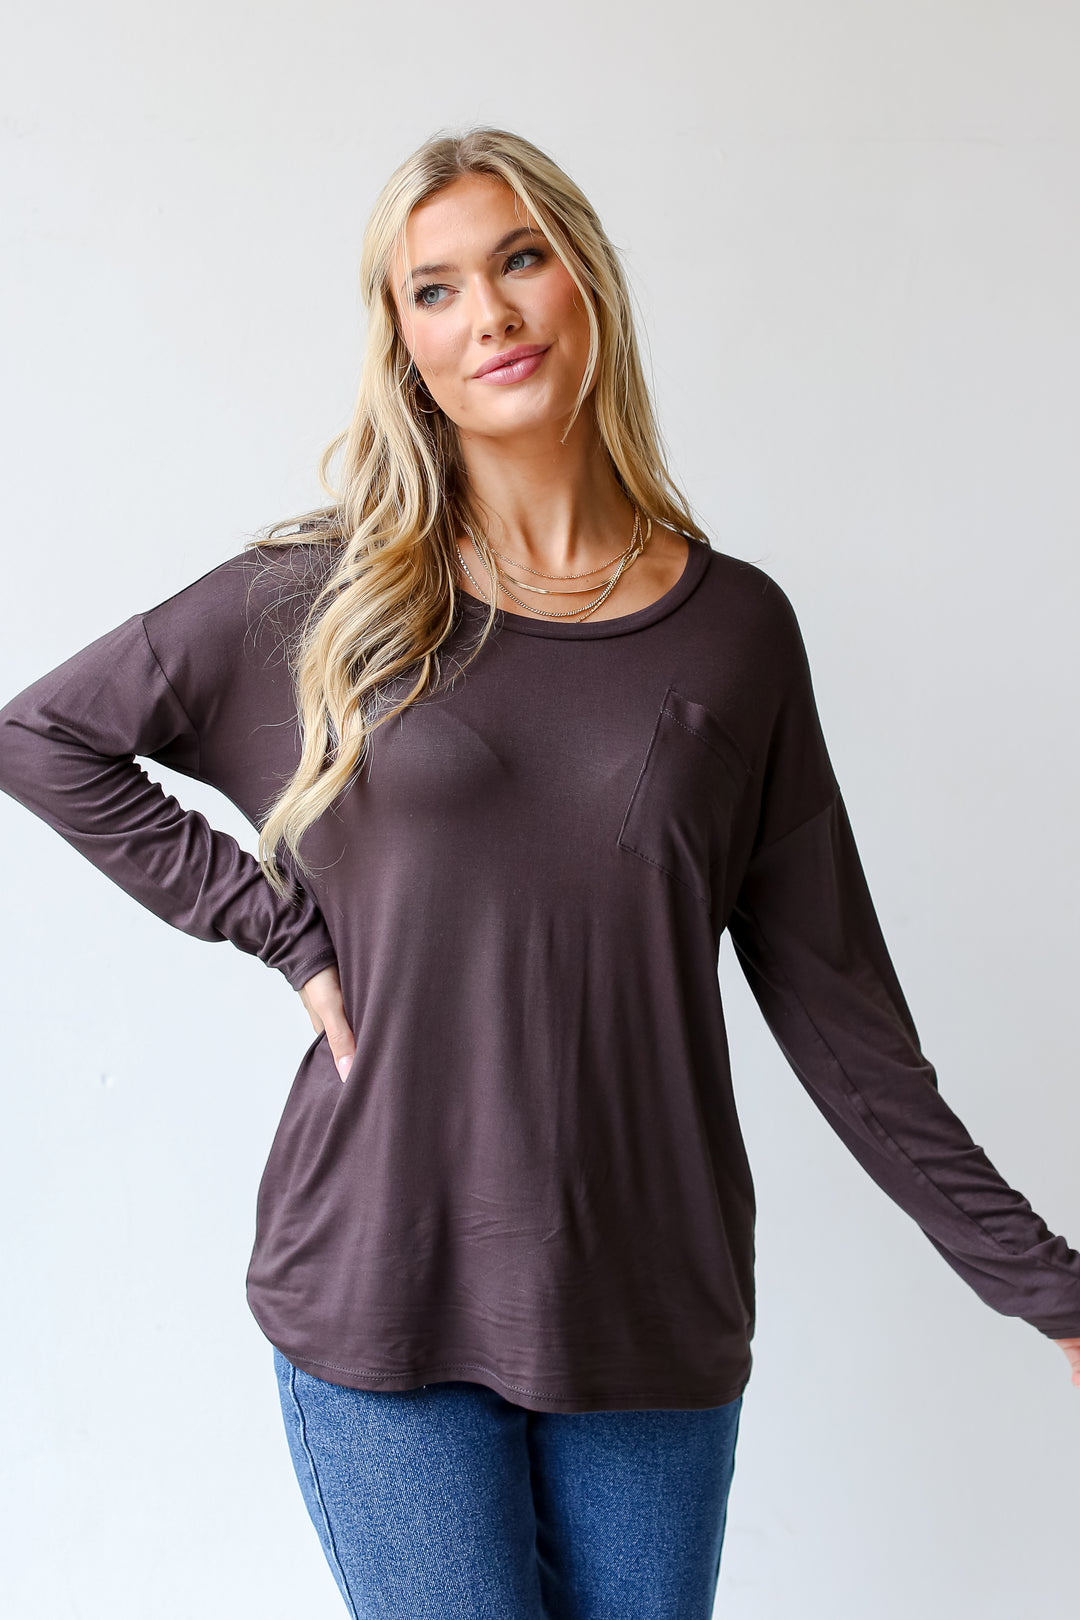 charcoal Pocket Tee front view